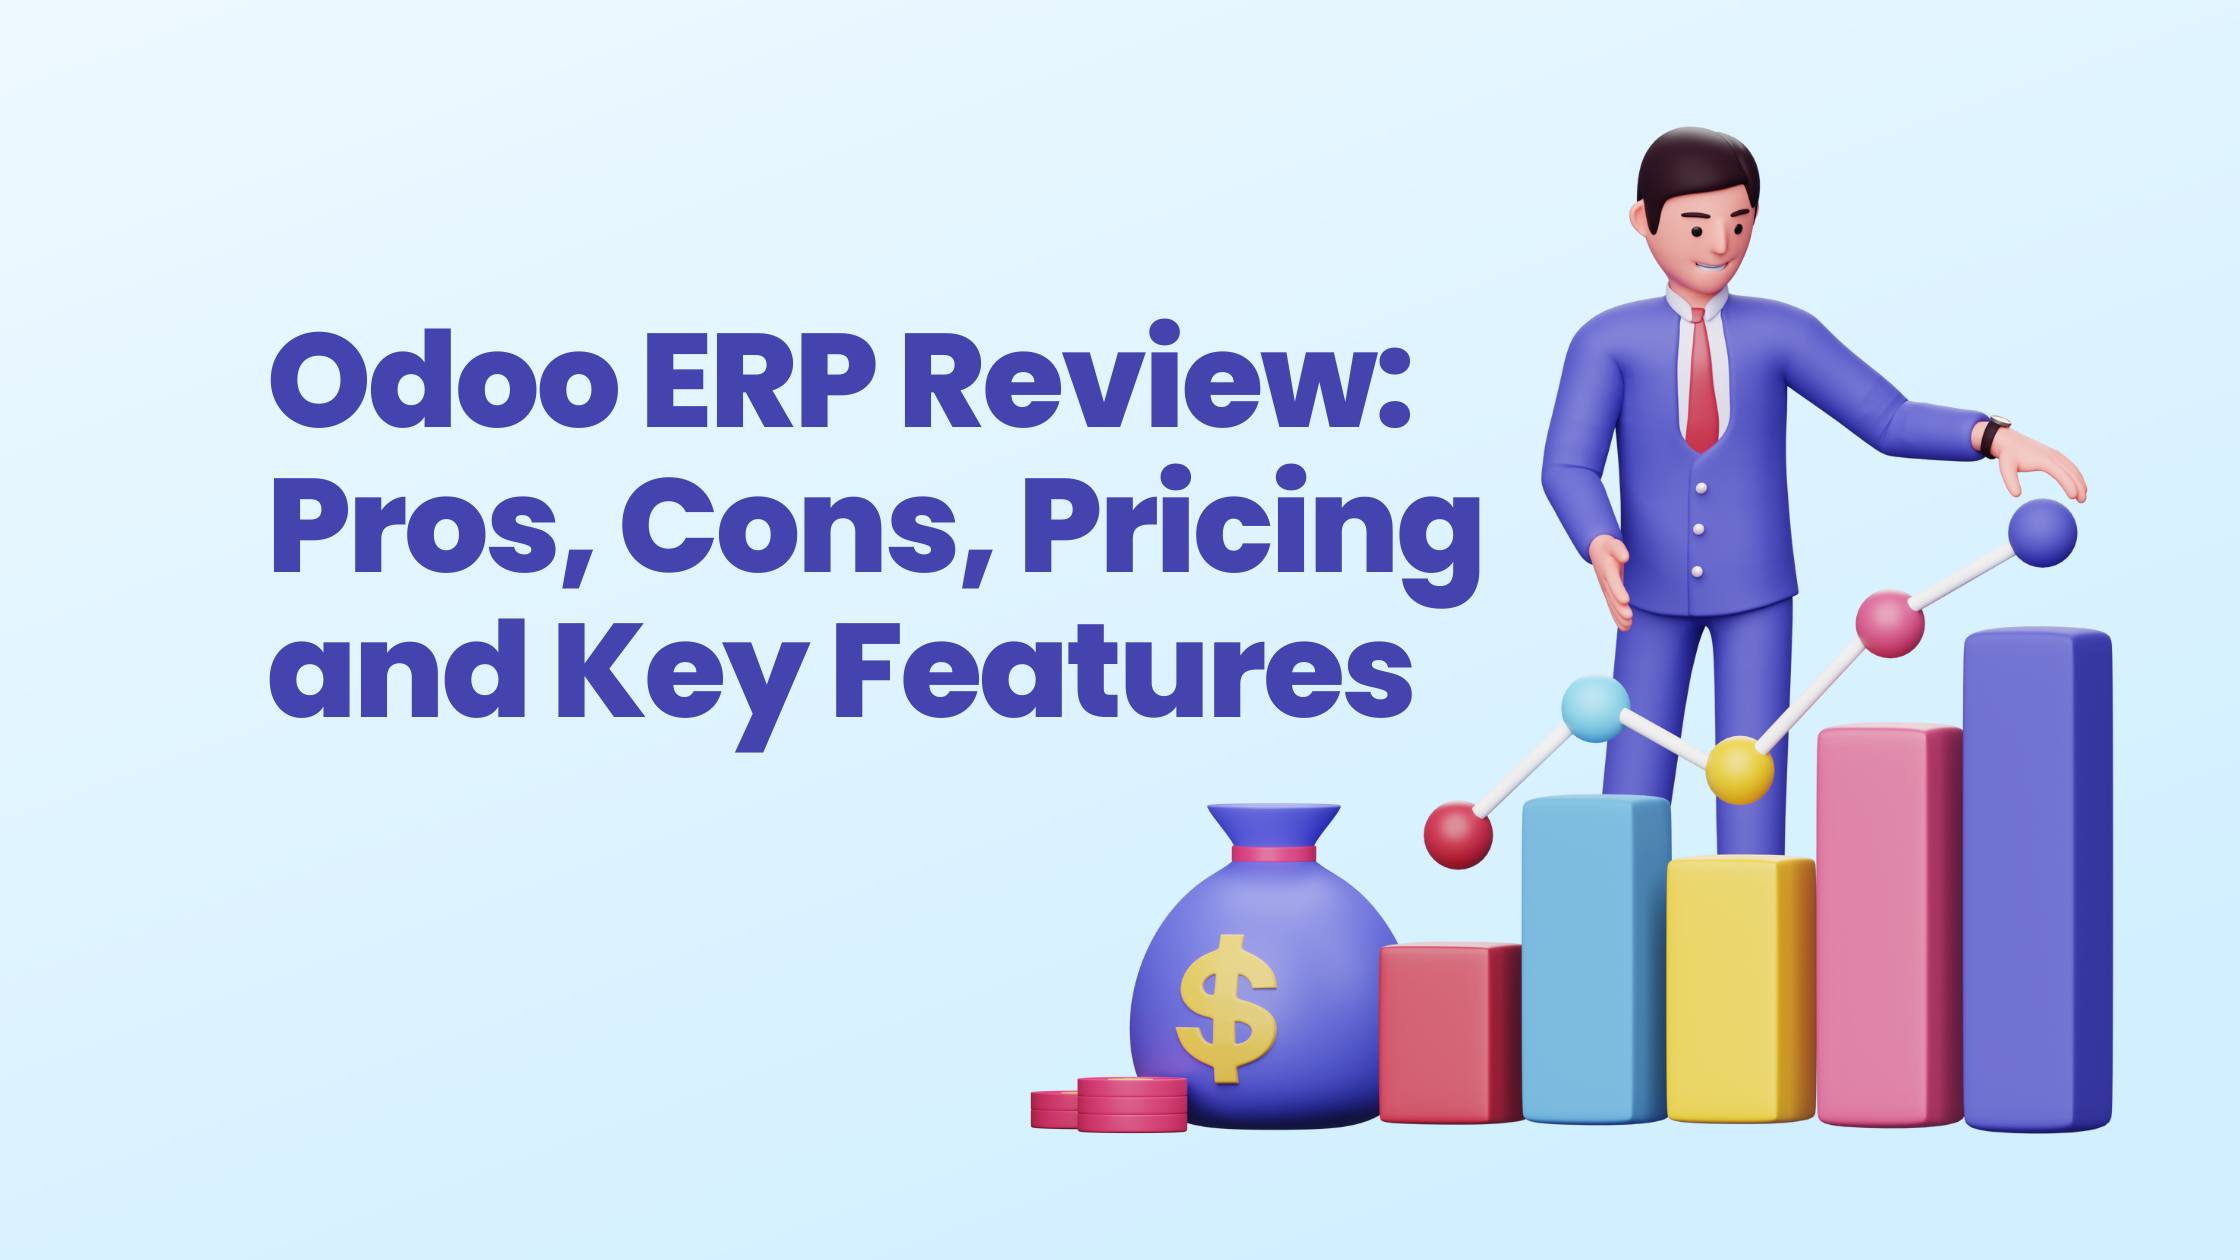 Odoo ERP Review: Pros, Cons, Pricing and Key Features